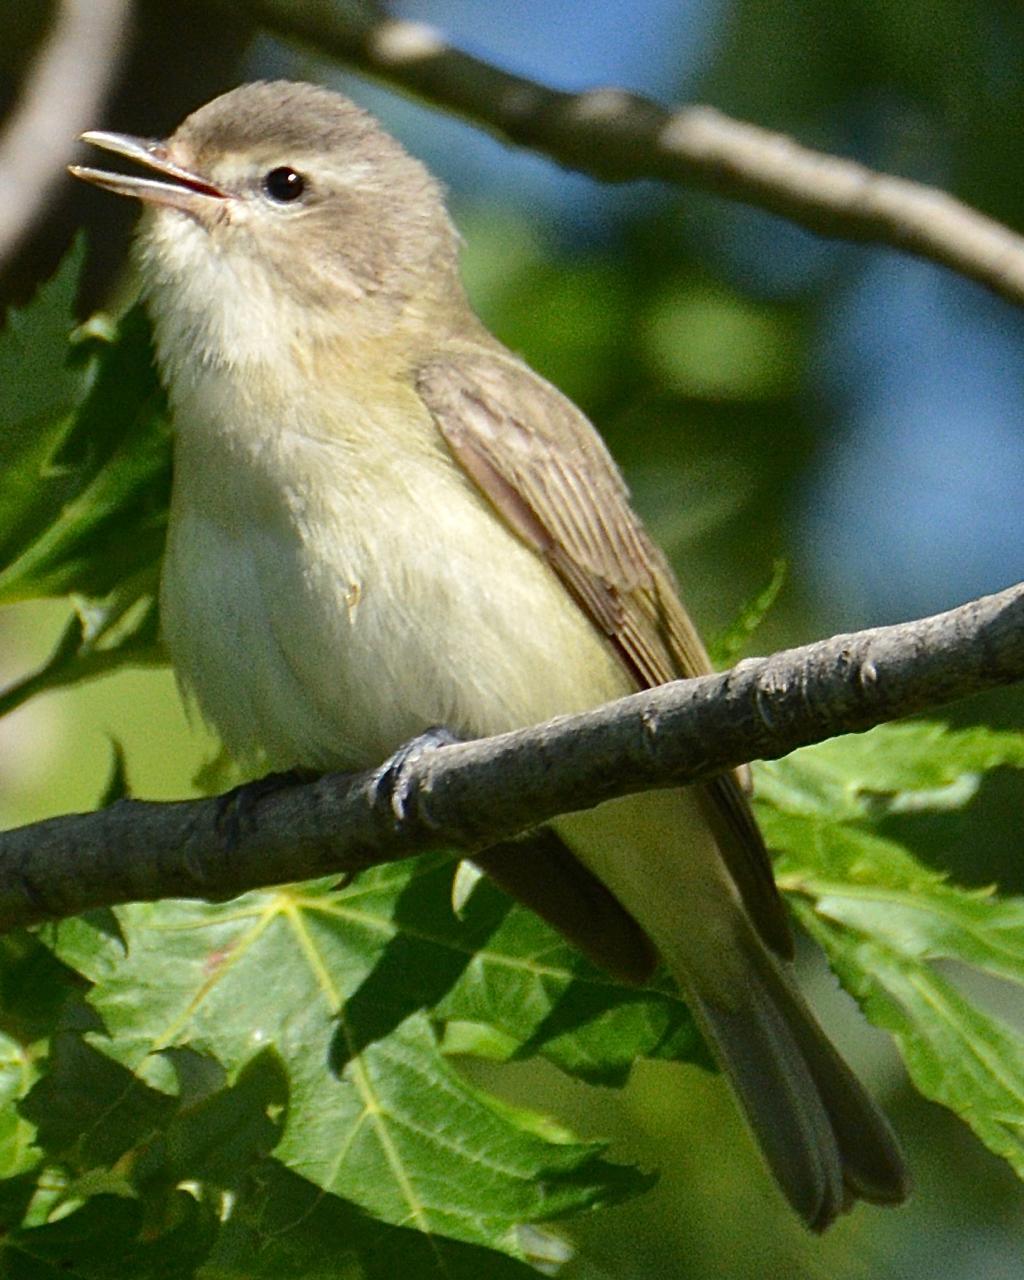 Warbling Vireo Photo by Brian Avent